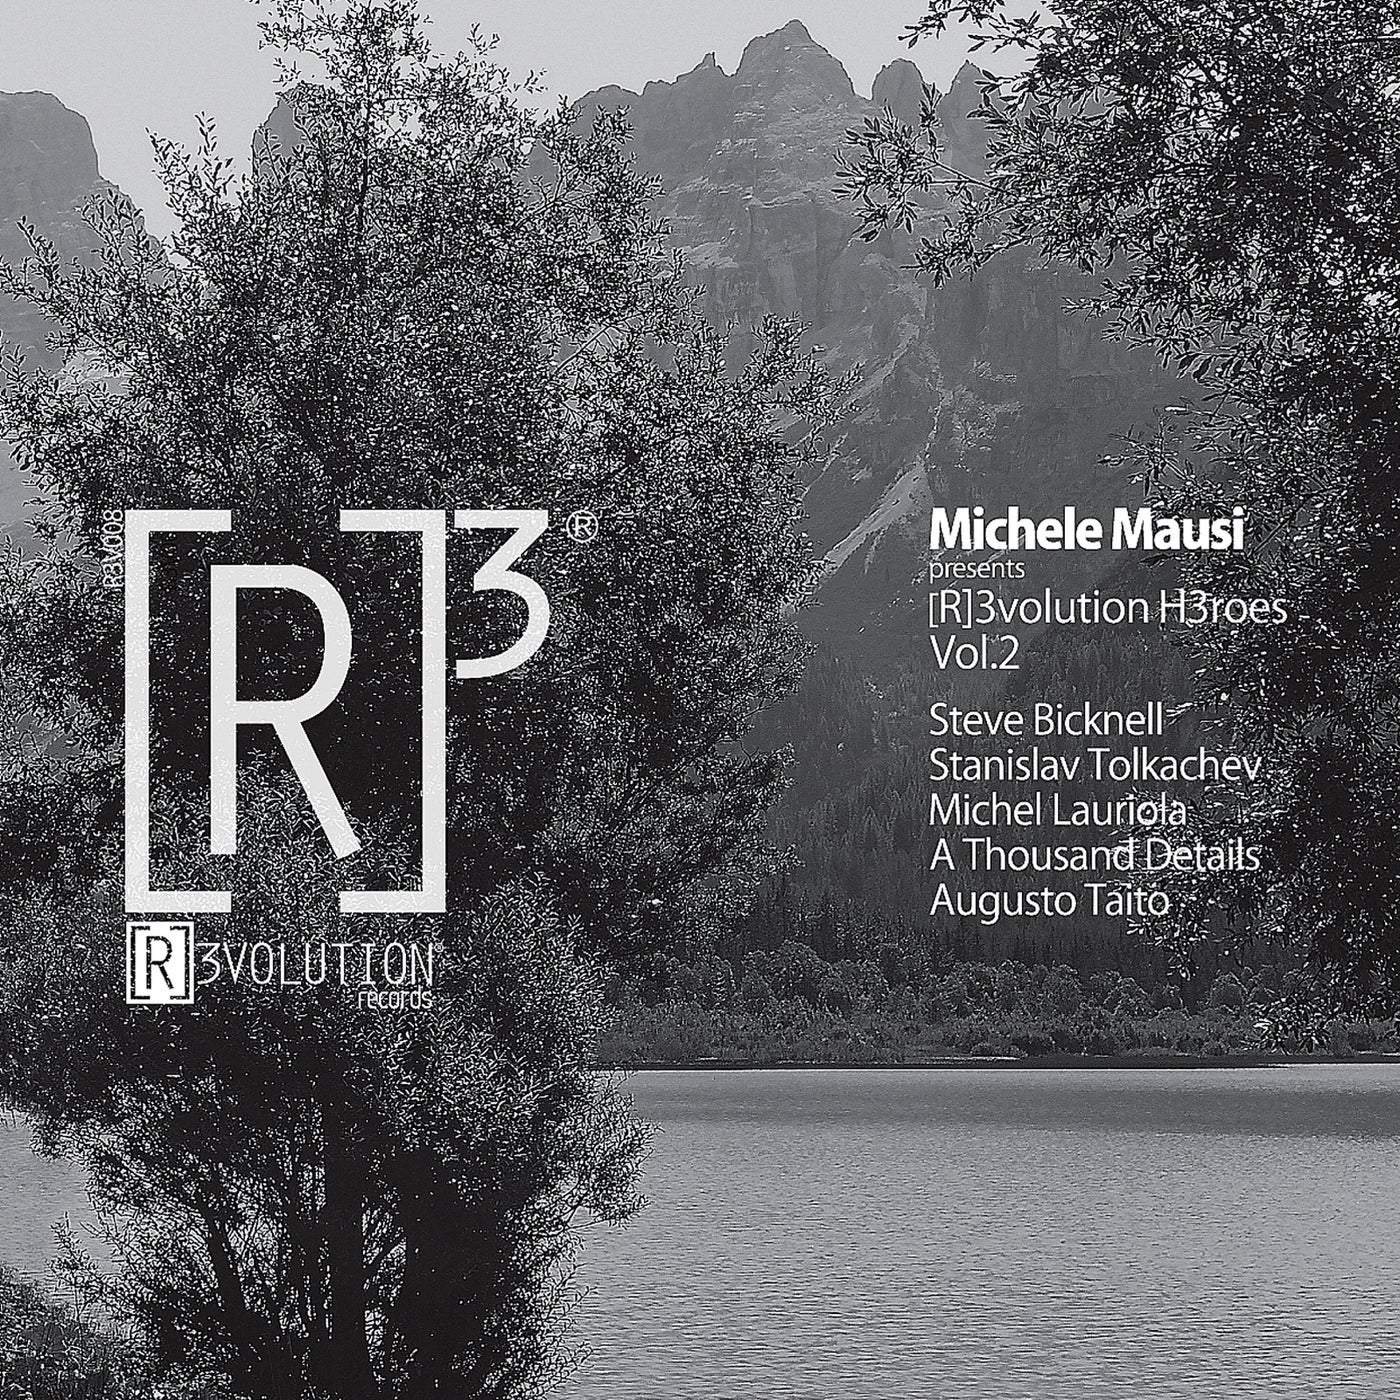 Download Steve Bicknell, Michel Lauriola, Michele Mausi, Stanislav Tolkachev, A Thousand Details, Augusto Taito - [R]3volution H3roes Vol.2 on Electrobuzz